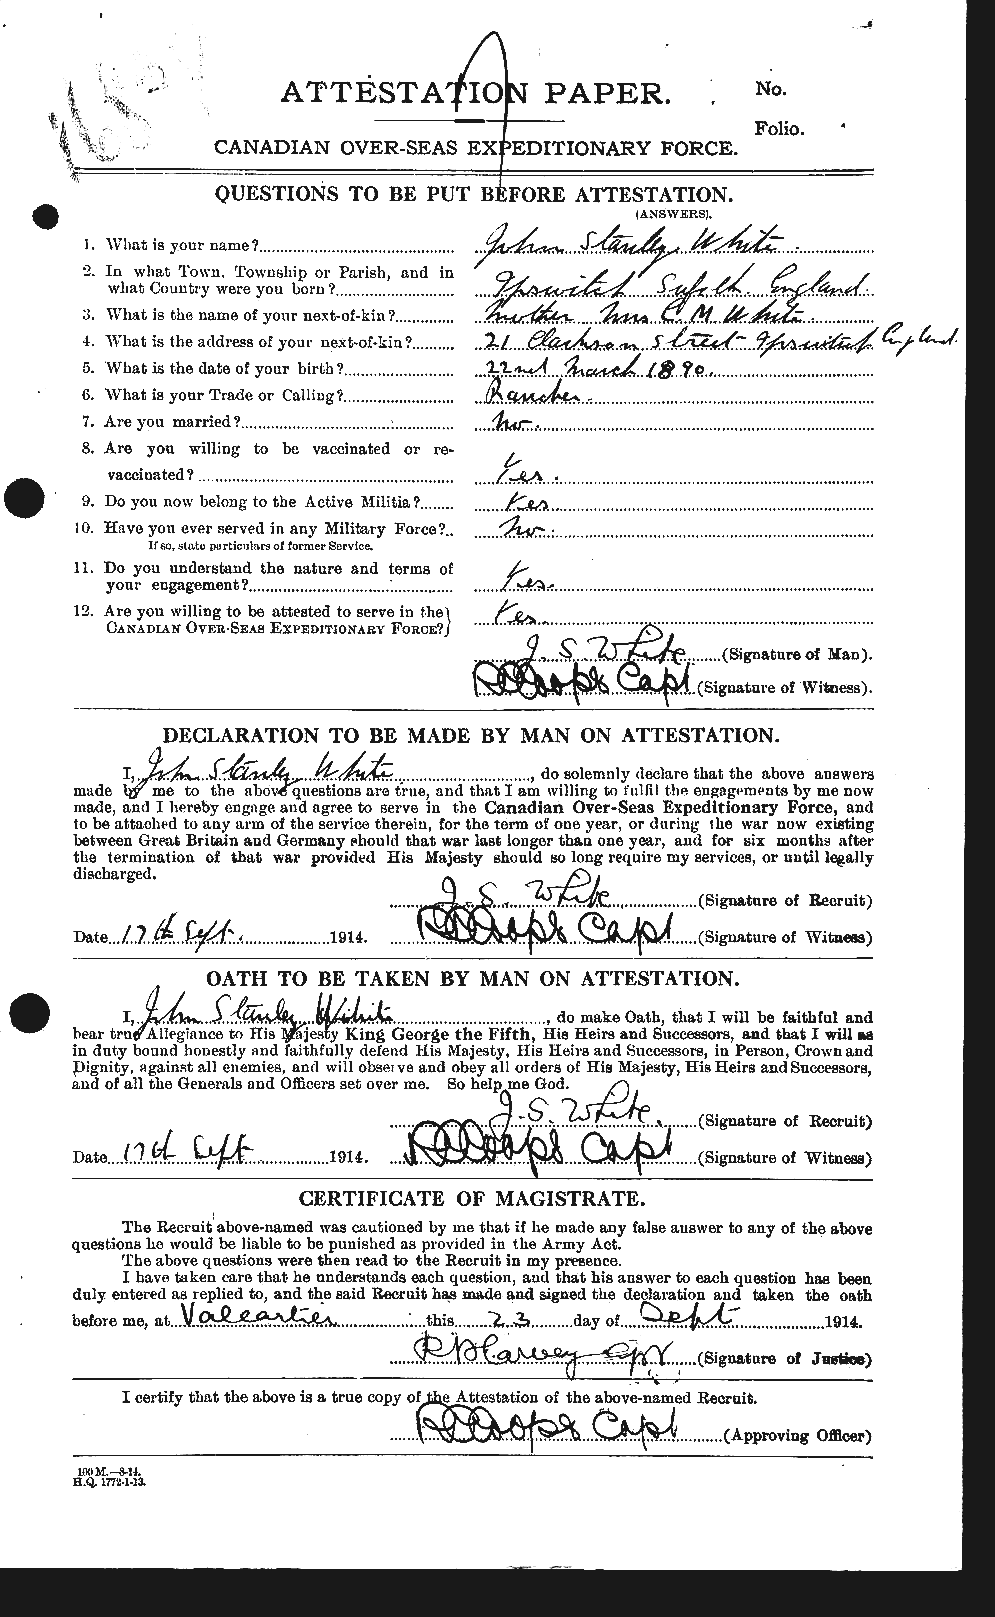 Personnel Records of the First World War - CEF 671601a